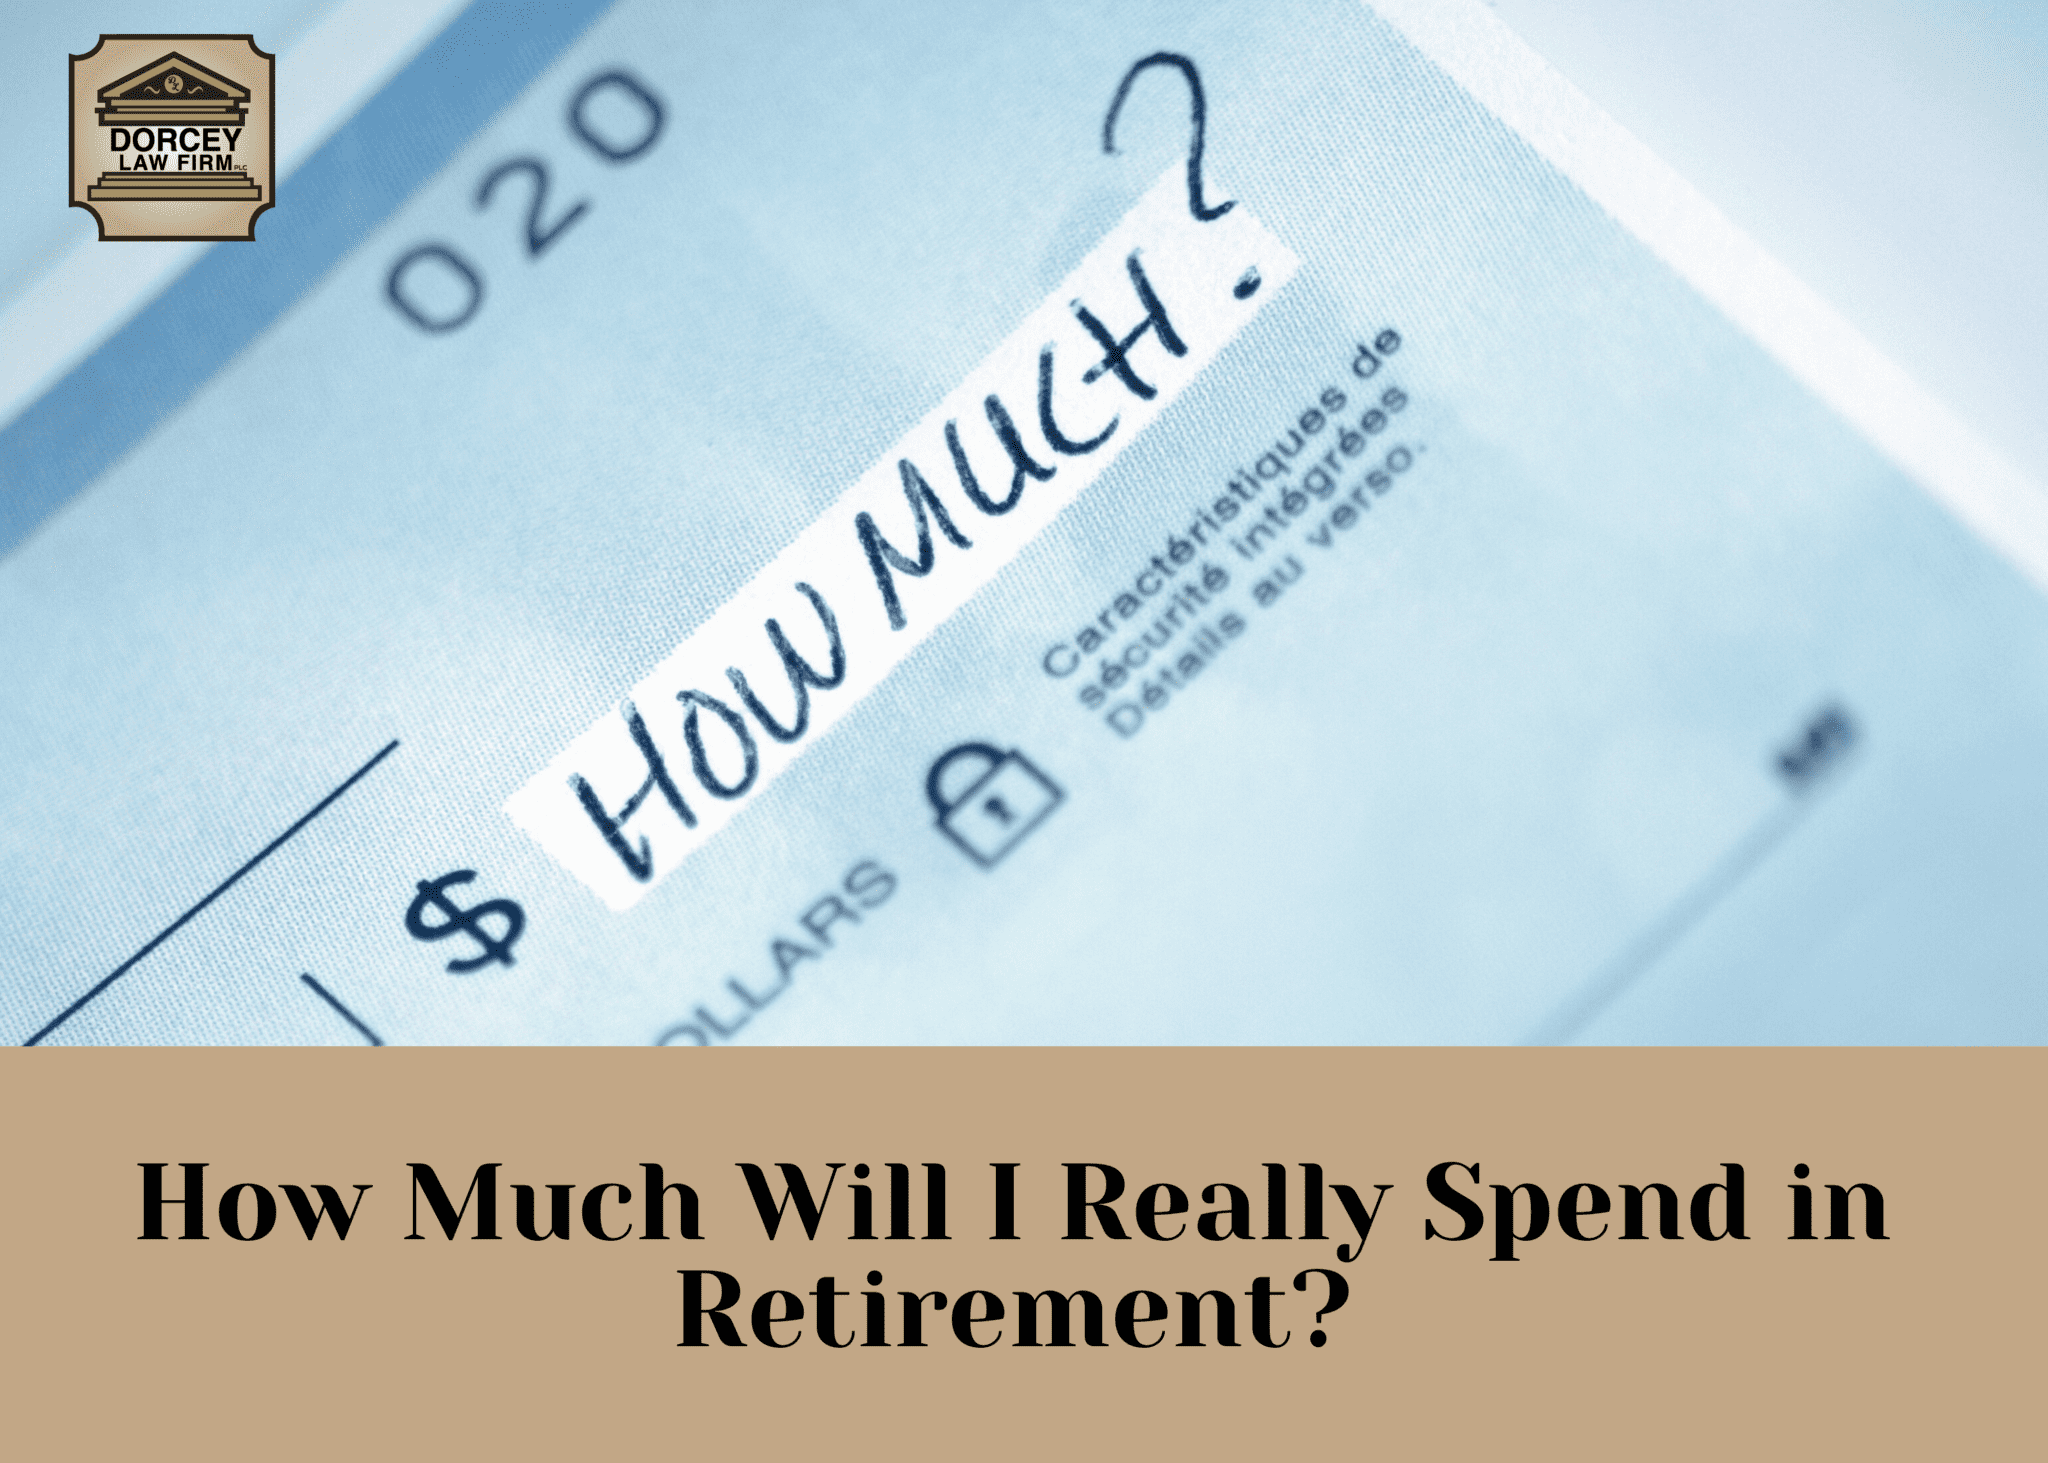 How Much Will I Really Spend in Retirement?